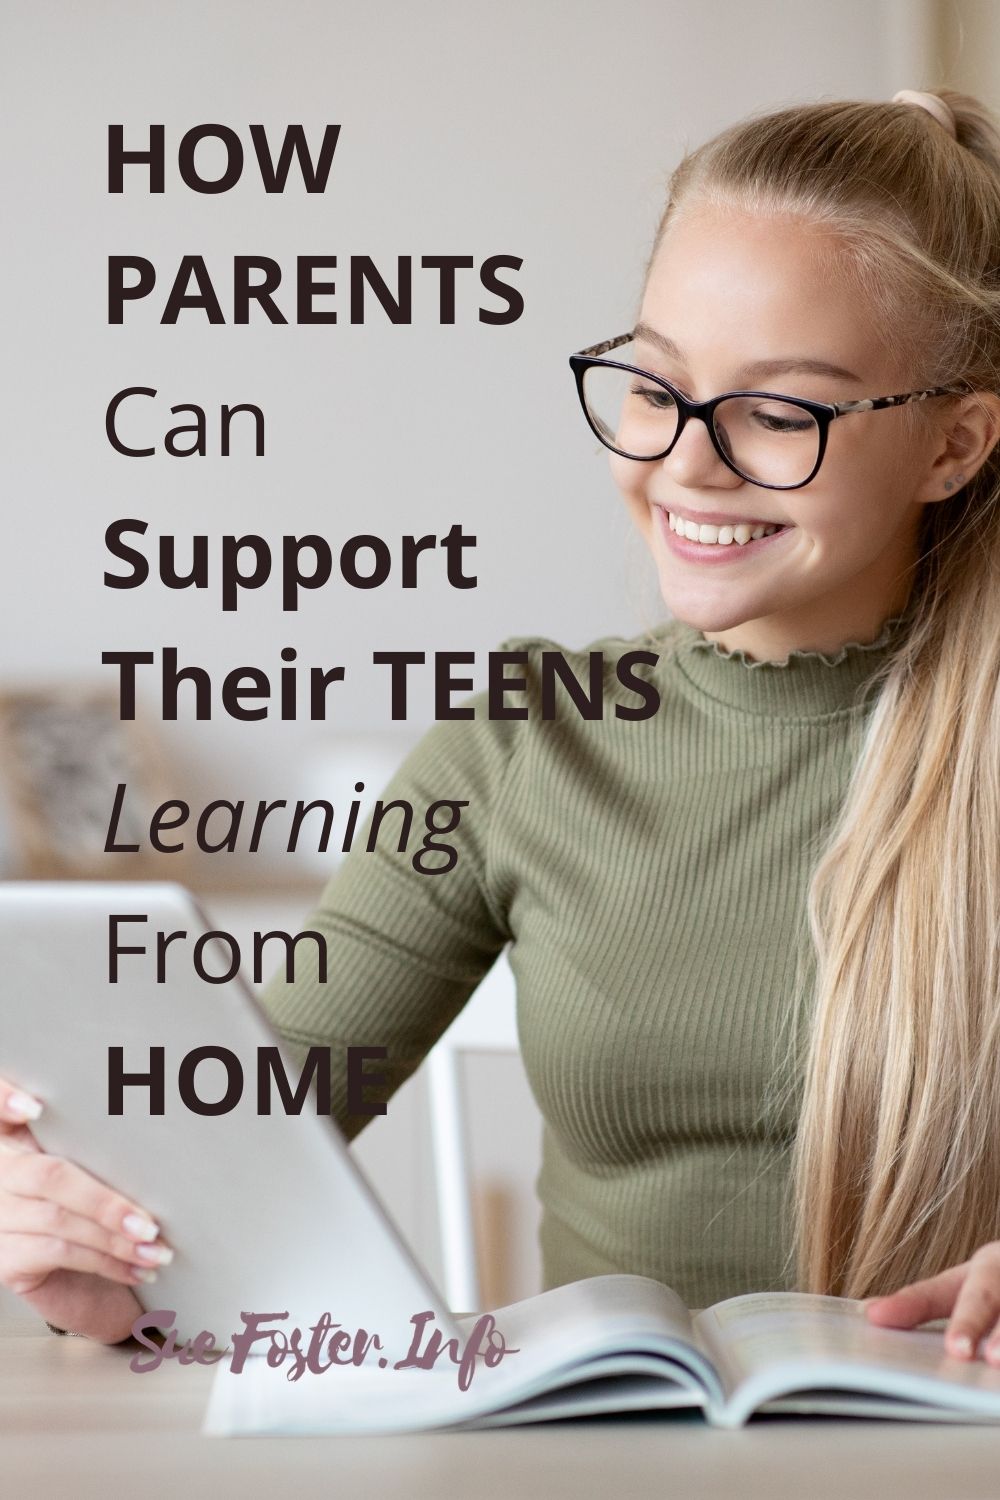 Here are the best ways to support teens with online schooling and other aspects of their life in quarantine.